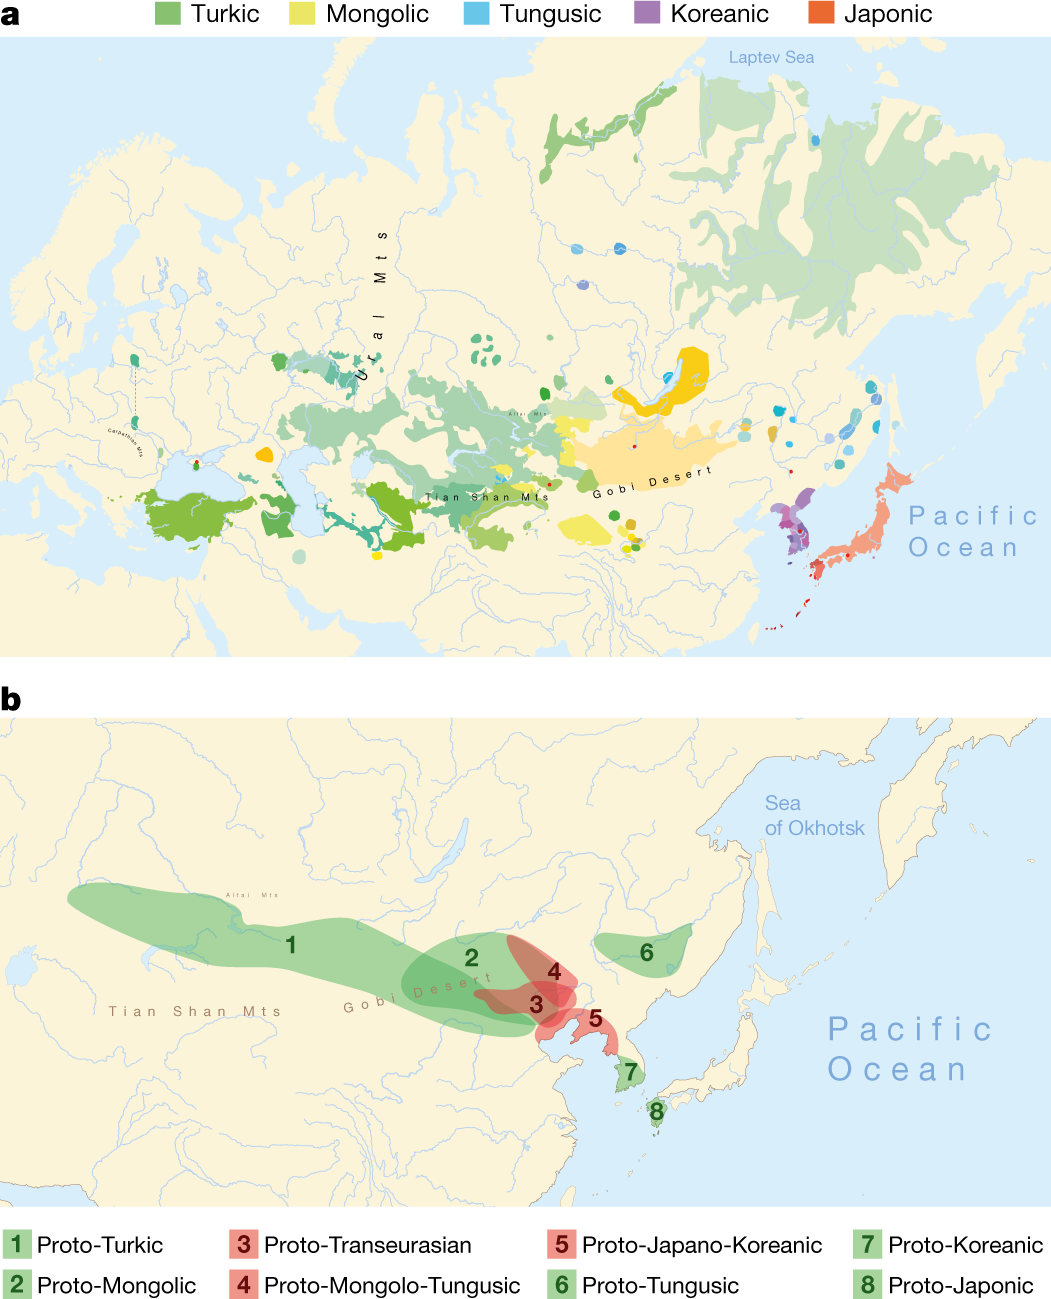 The Liao River Valley Is The Birthplace Of 100 Trans-Eurasian Dialects And Languages